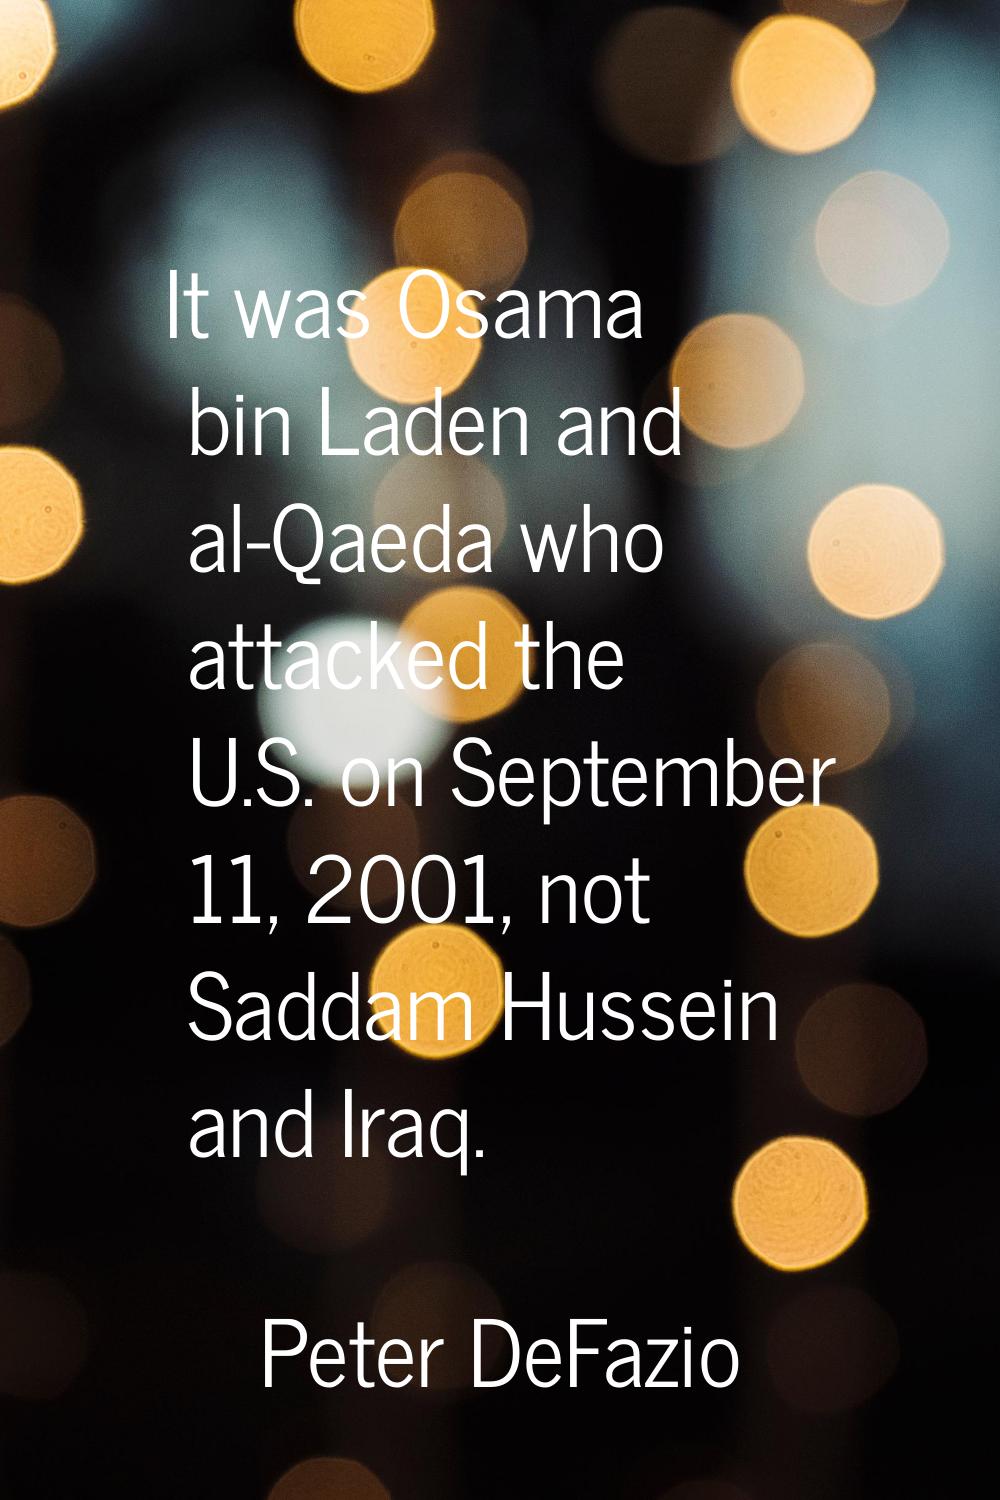 It was Osama bin Laden and al-Qaeda who attacked the U.S. on September 11, 2001, not Saddam Hussein